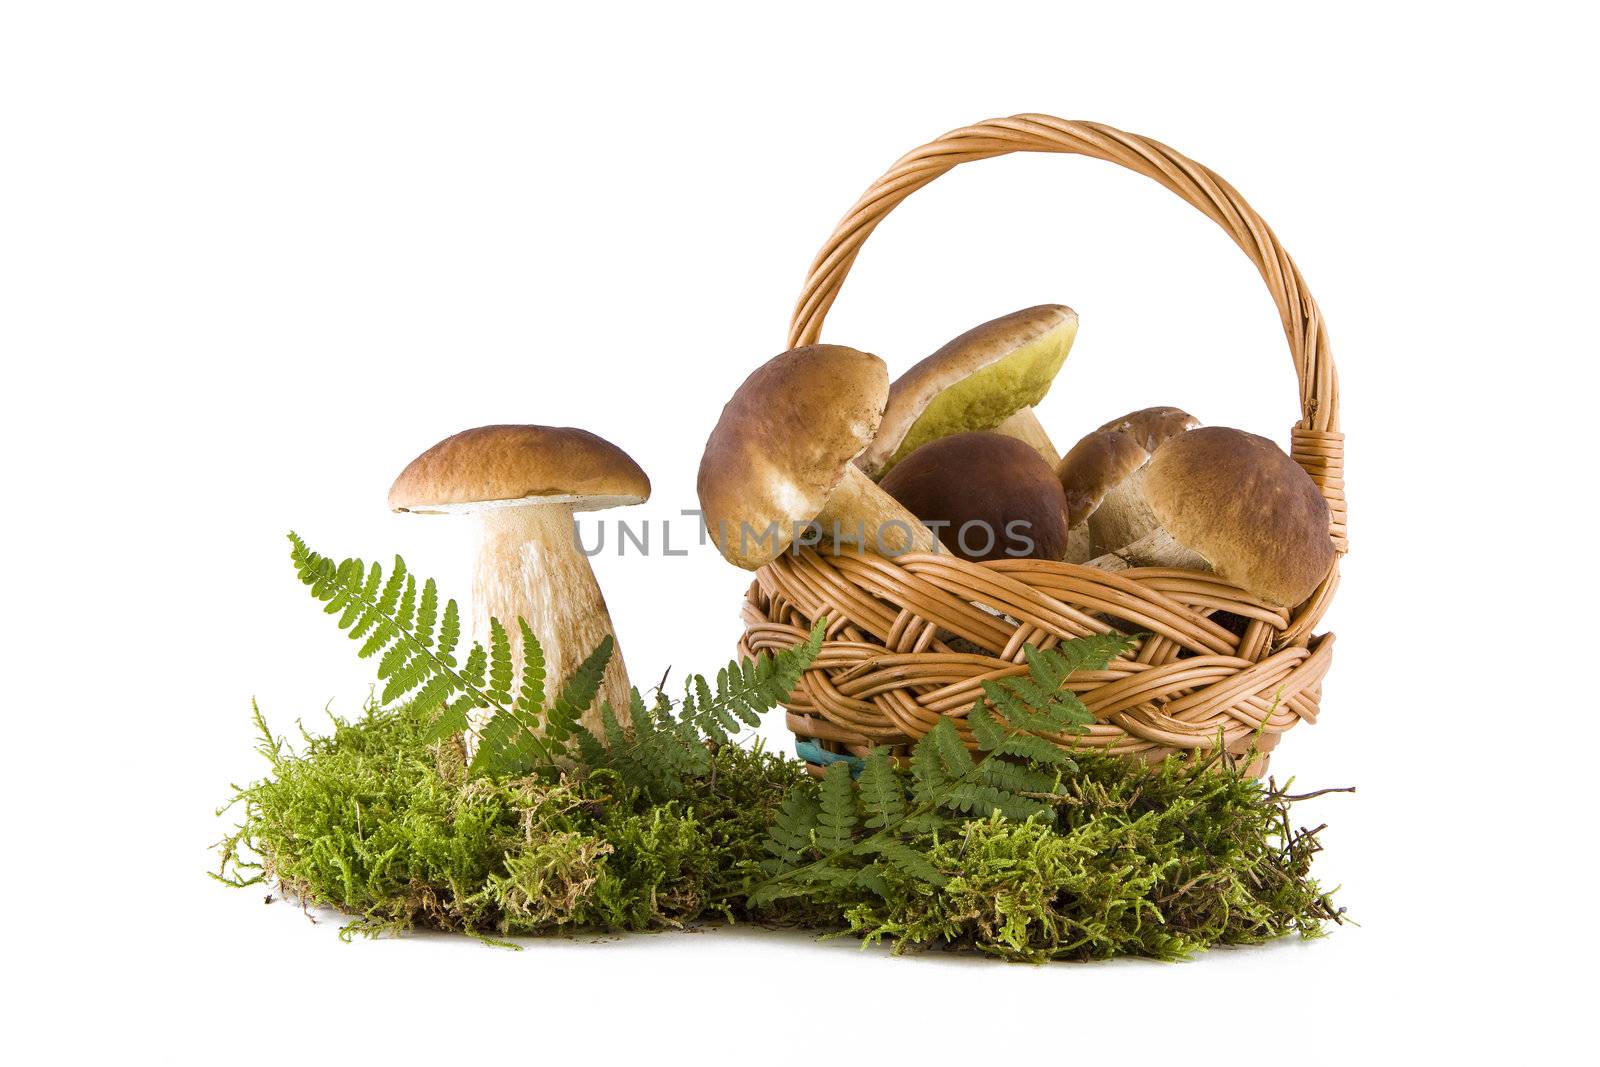 Boletus mushrooms in and out the basket by Gbuglok